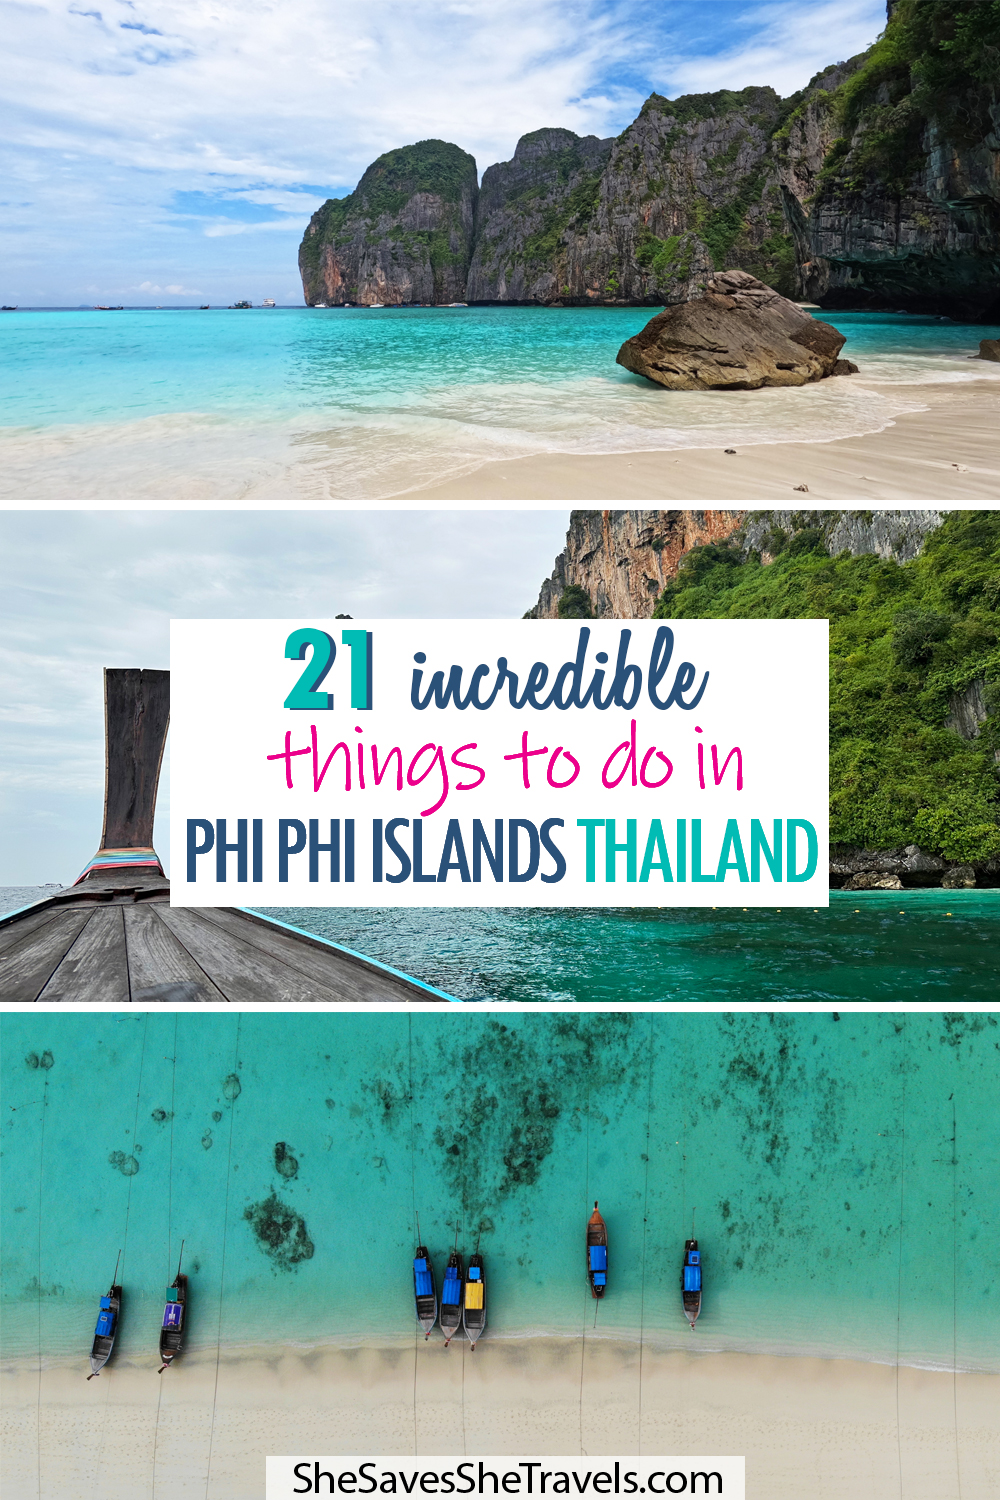 beach images with text 21 incredible things to do in phi phi islands, thailand